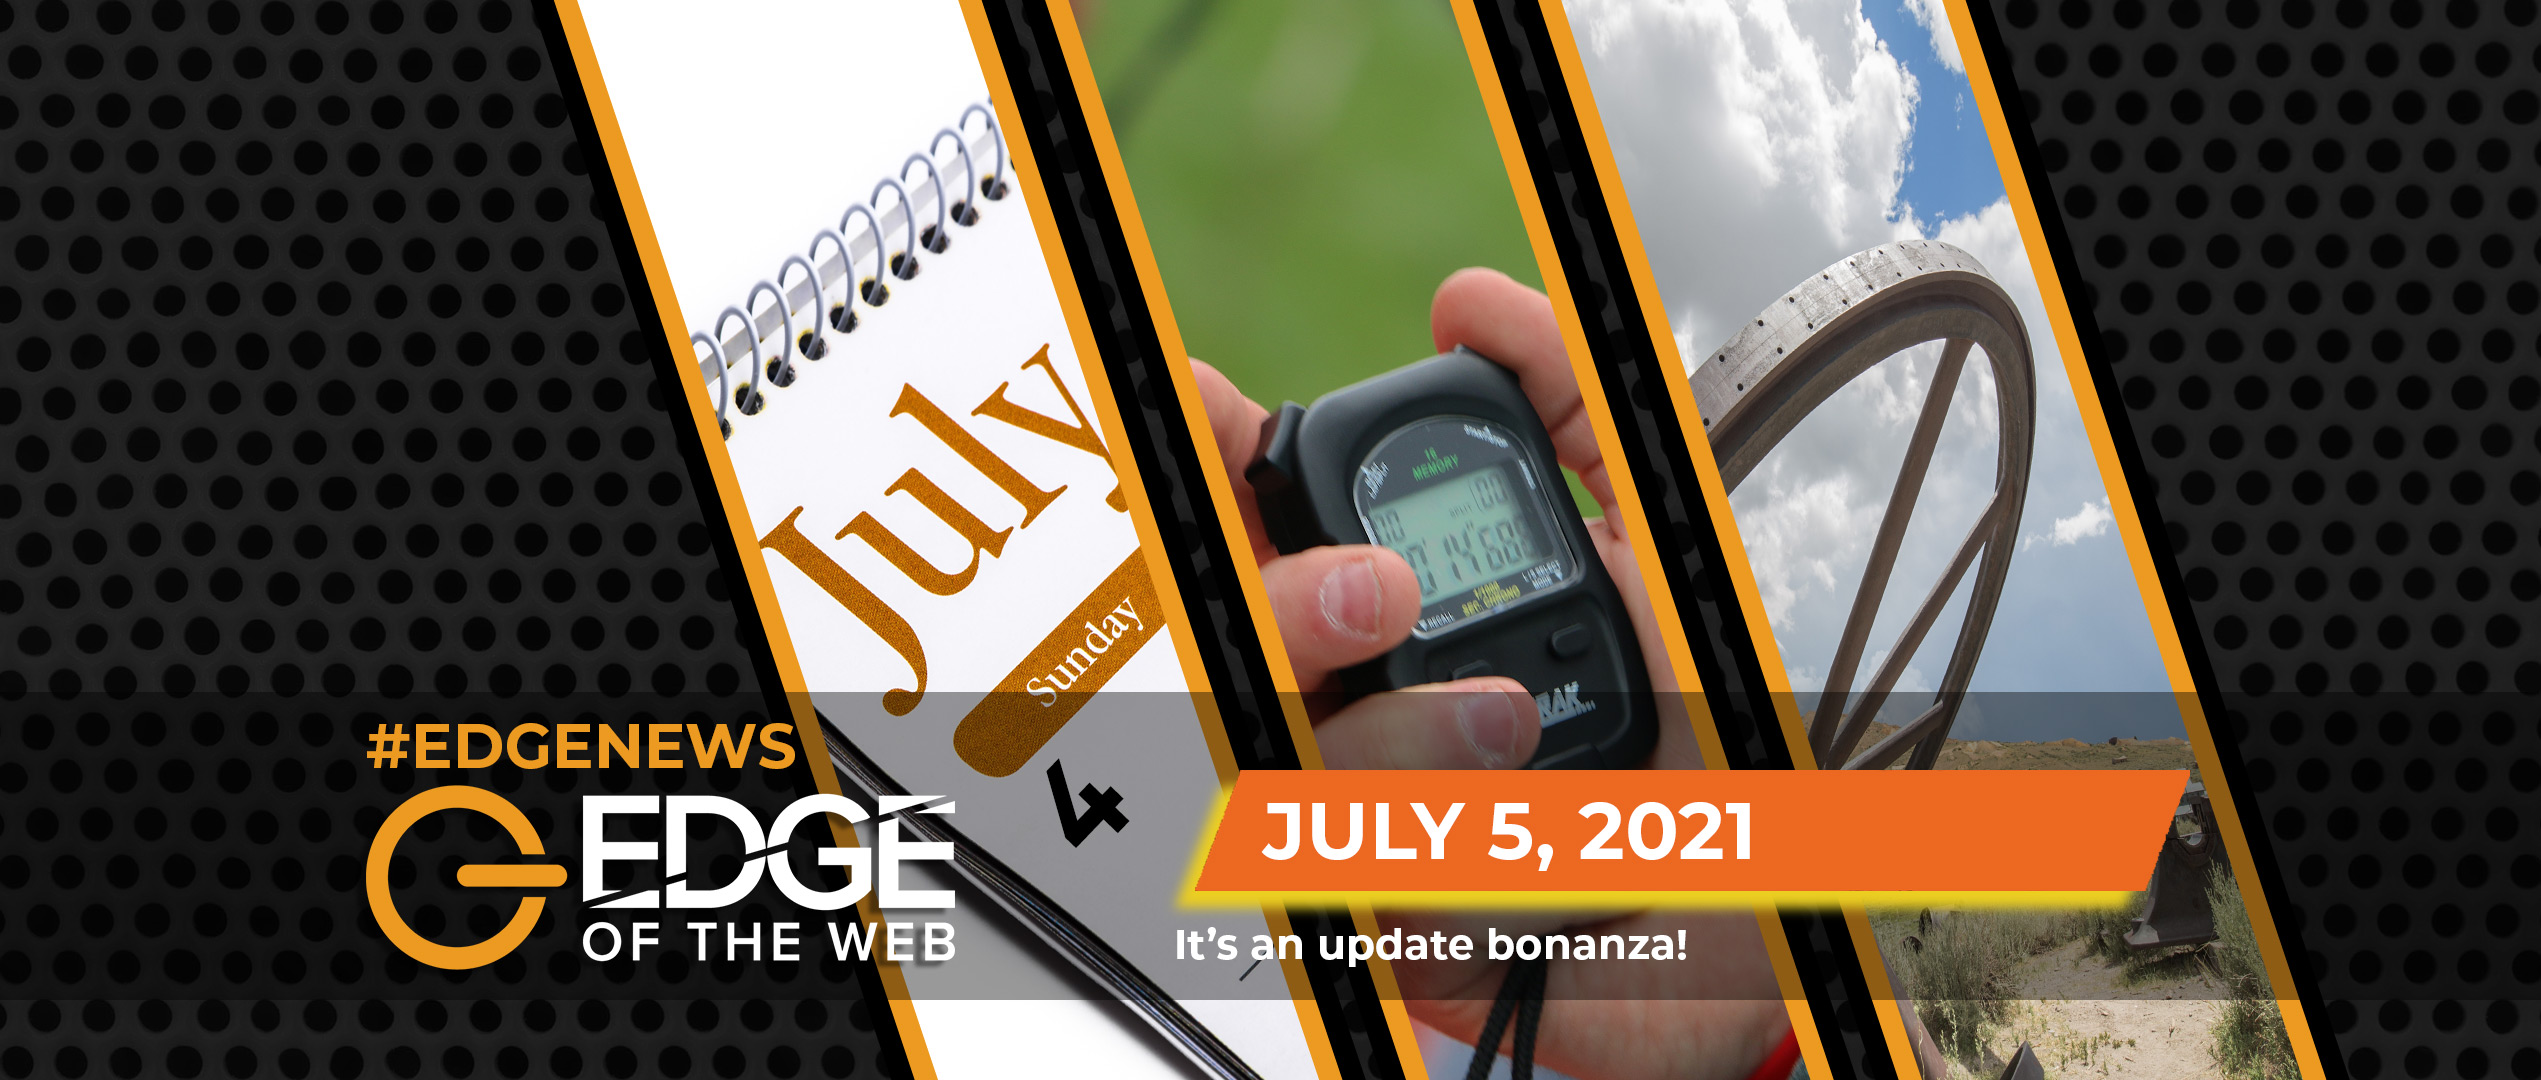 News from the EDGE | July 5, 2021